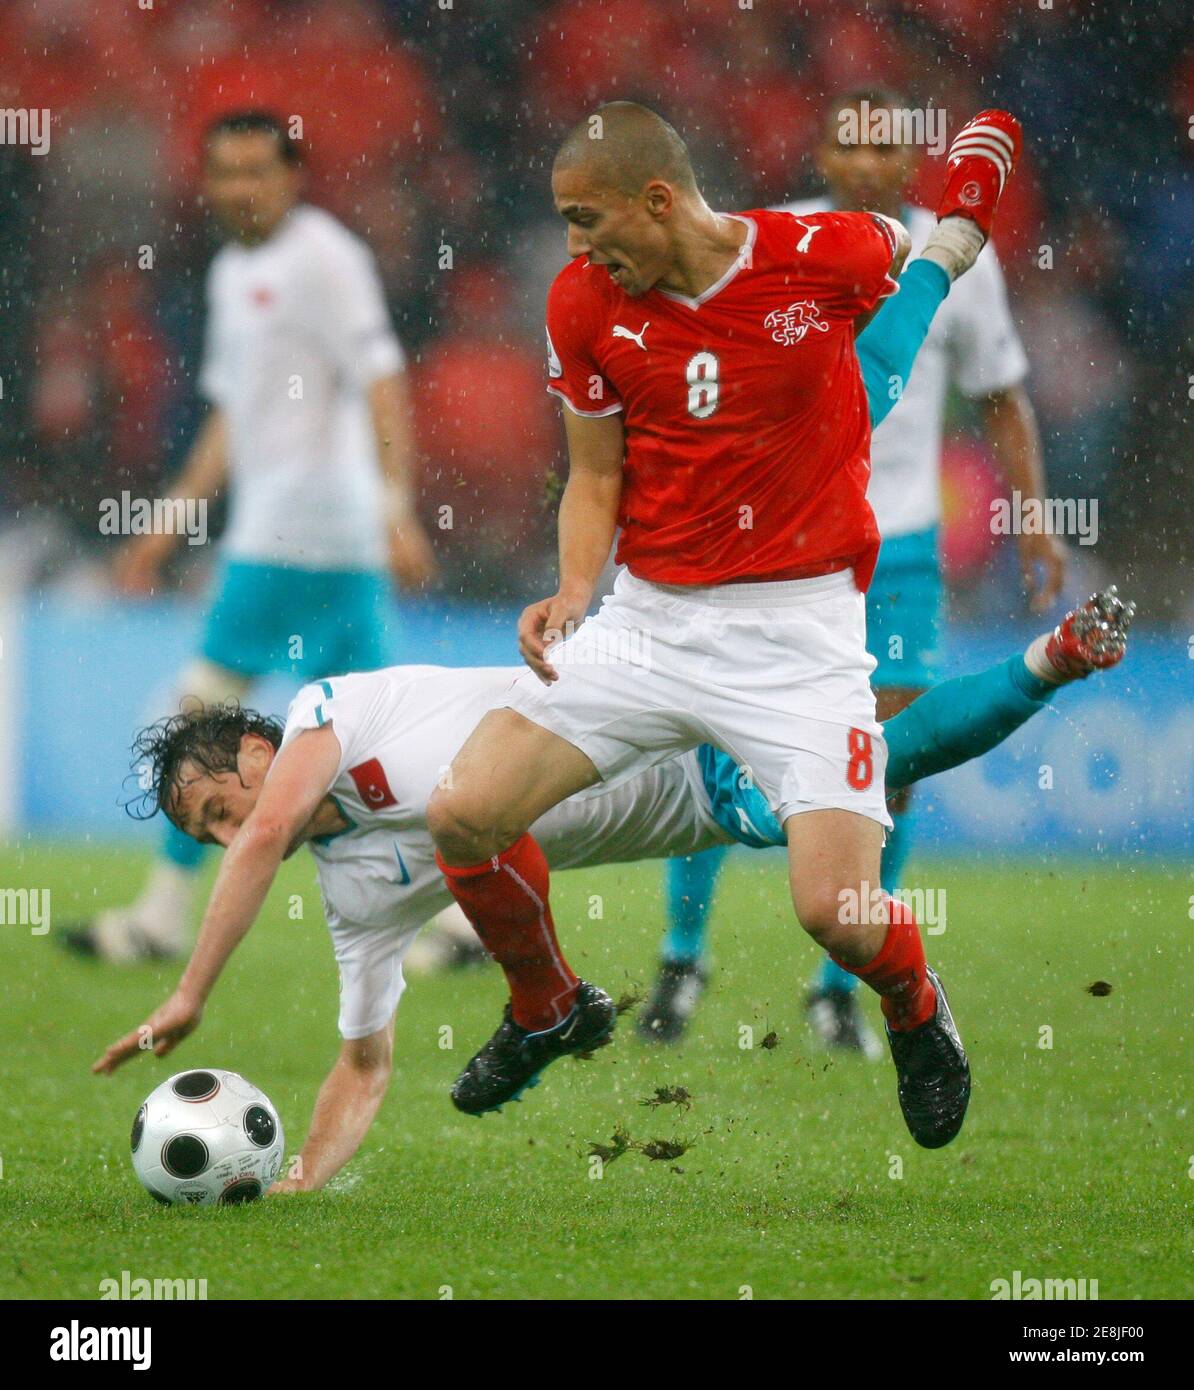 Switzerland's Gokhan Inler (R) is challenged by Turkey's Tuncay Sanli during their Group A Euro 2008 soccer match at St Jakob Park in Basel, June 11, 2008.     REUTERS/Jerry Lampen (SWITZERLAND)     MOBILE OUT. EDITORIAL USE ONLY Stock Photo